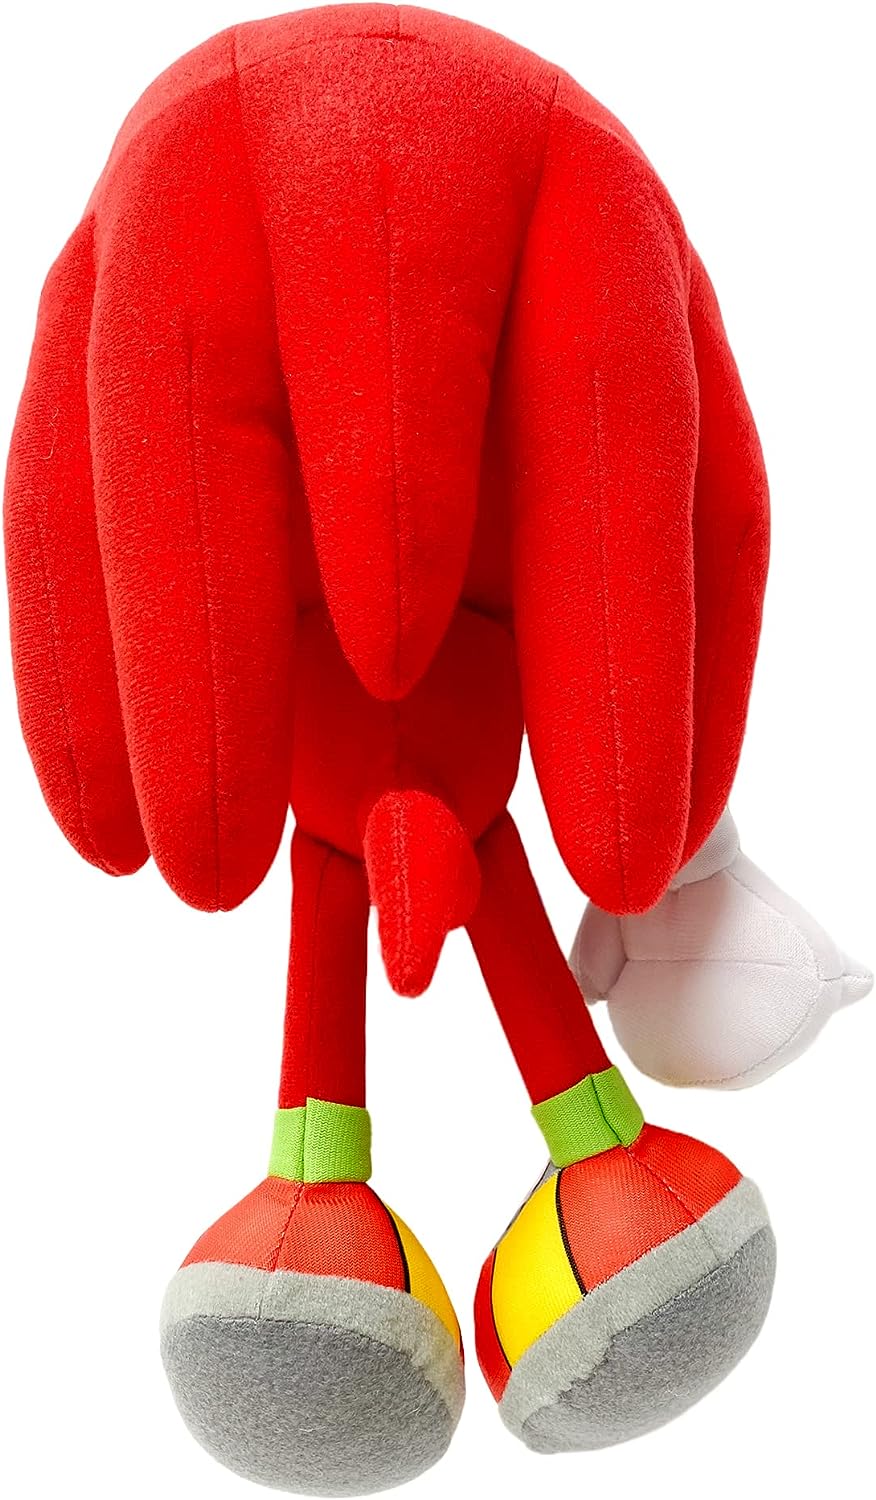 Sonic The Hedgehog - Knuckles Grin Plush 10" Great Eastern Entertainment